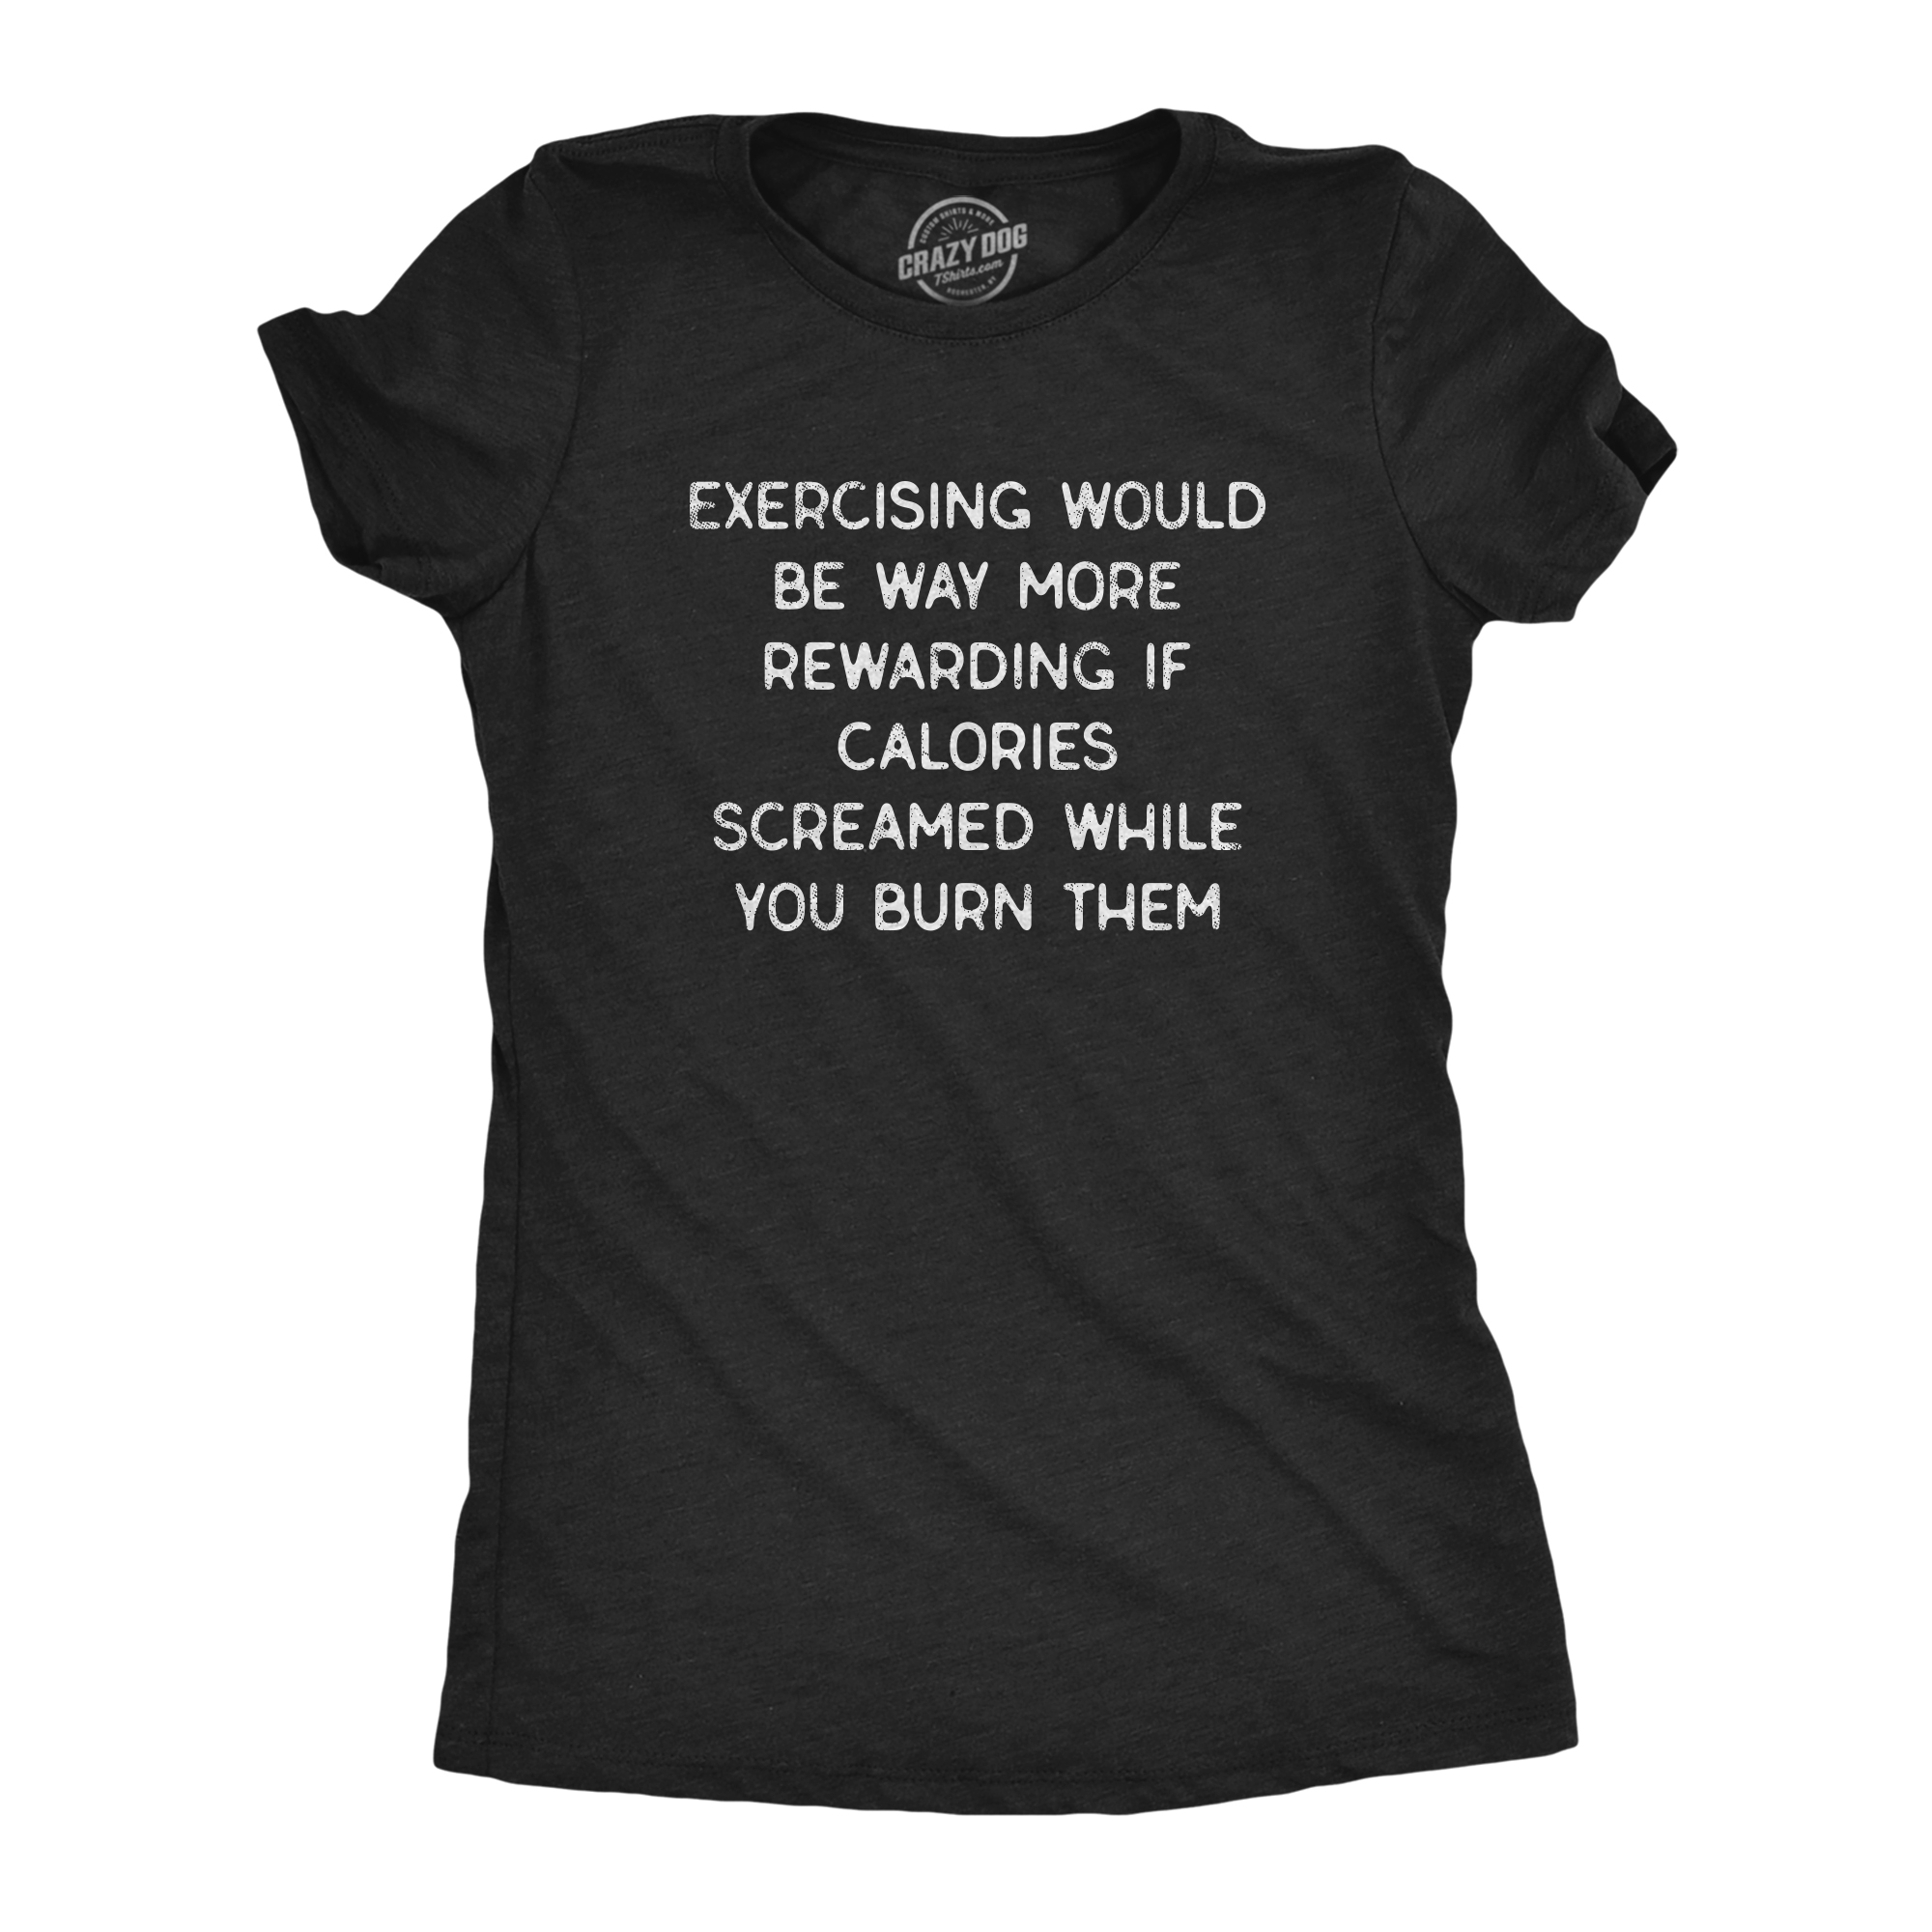 Crazy Dog Tshirts Womens Exercising Would Be Way More Rewarding If Calories Screamed Back While You Burn Them Tshirt